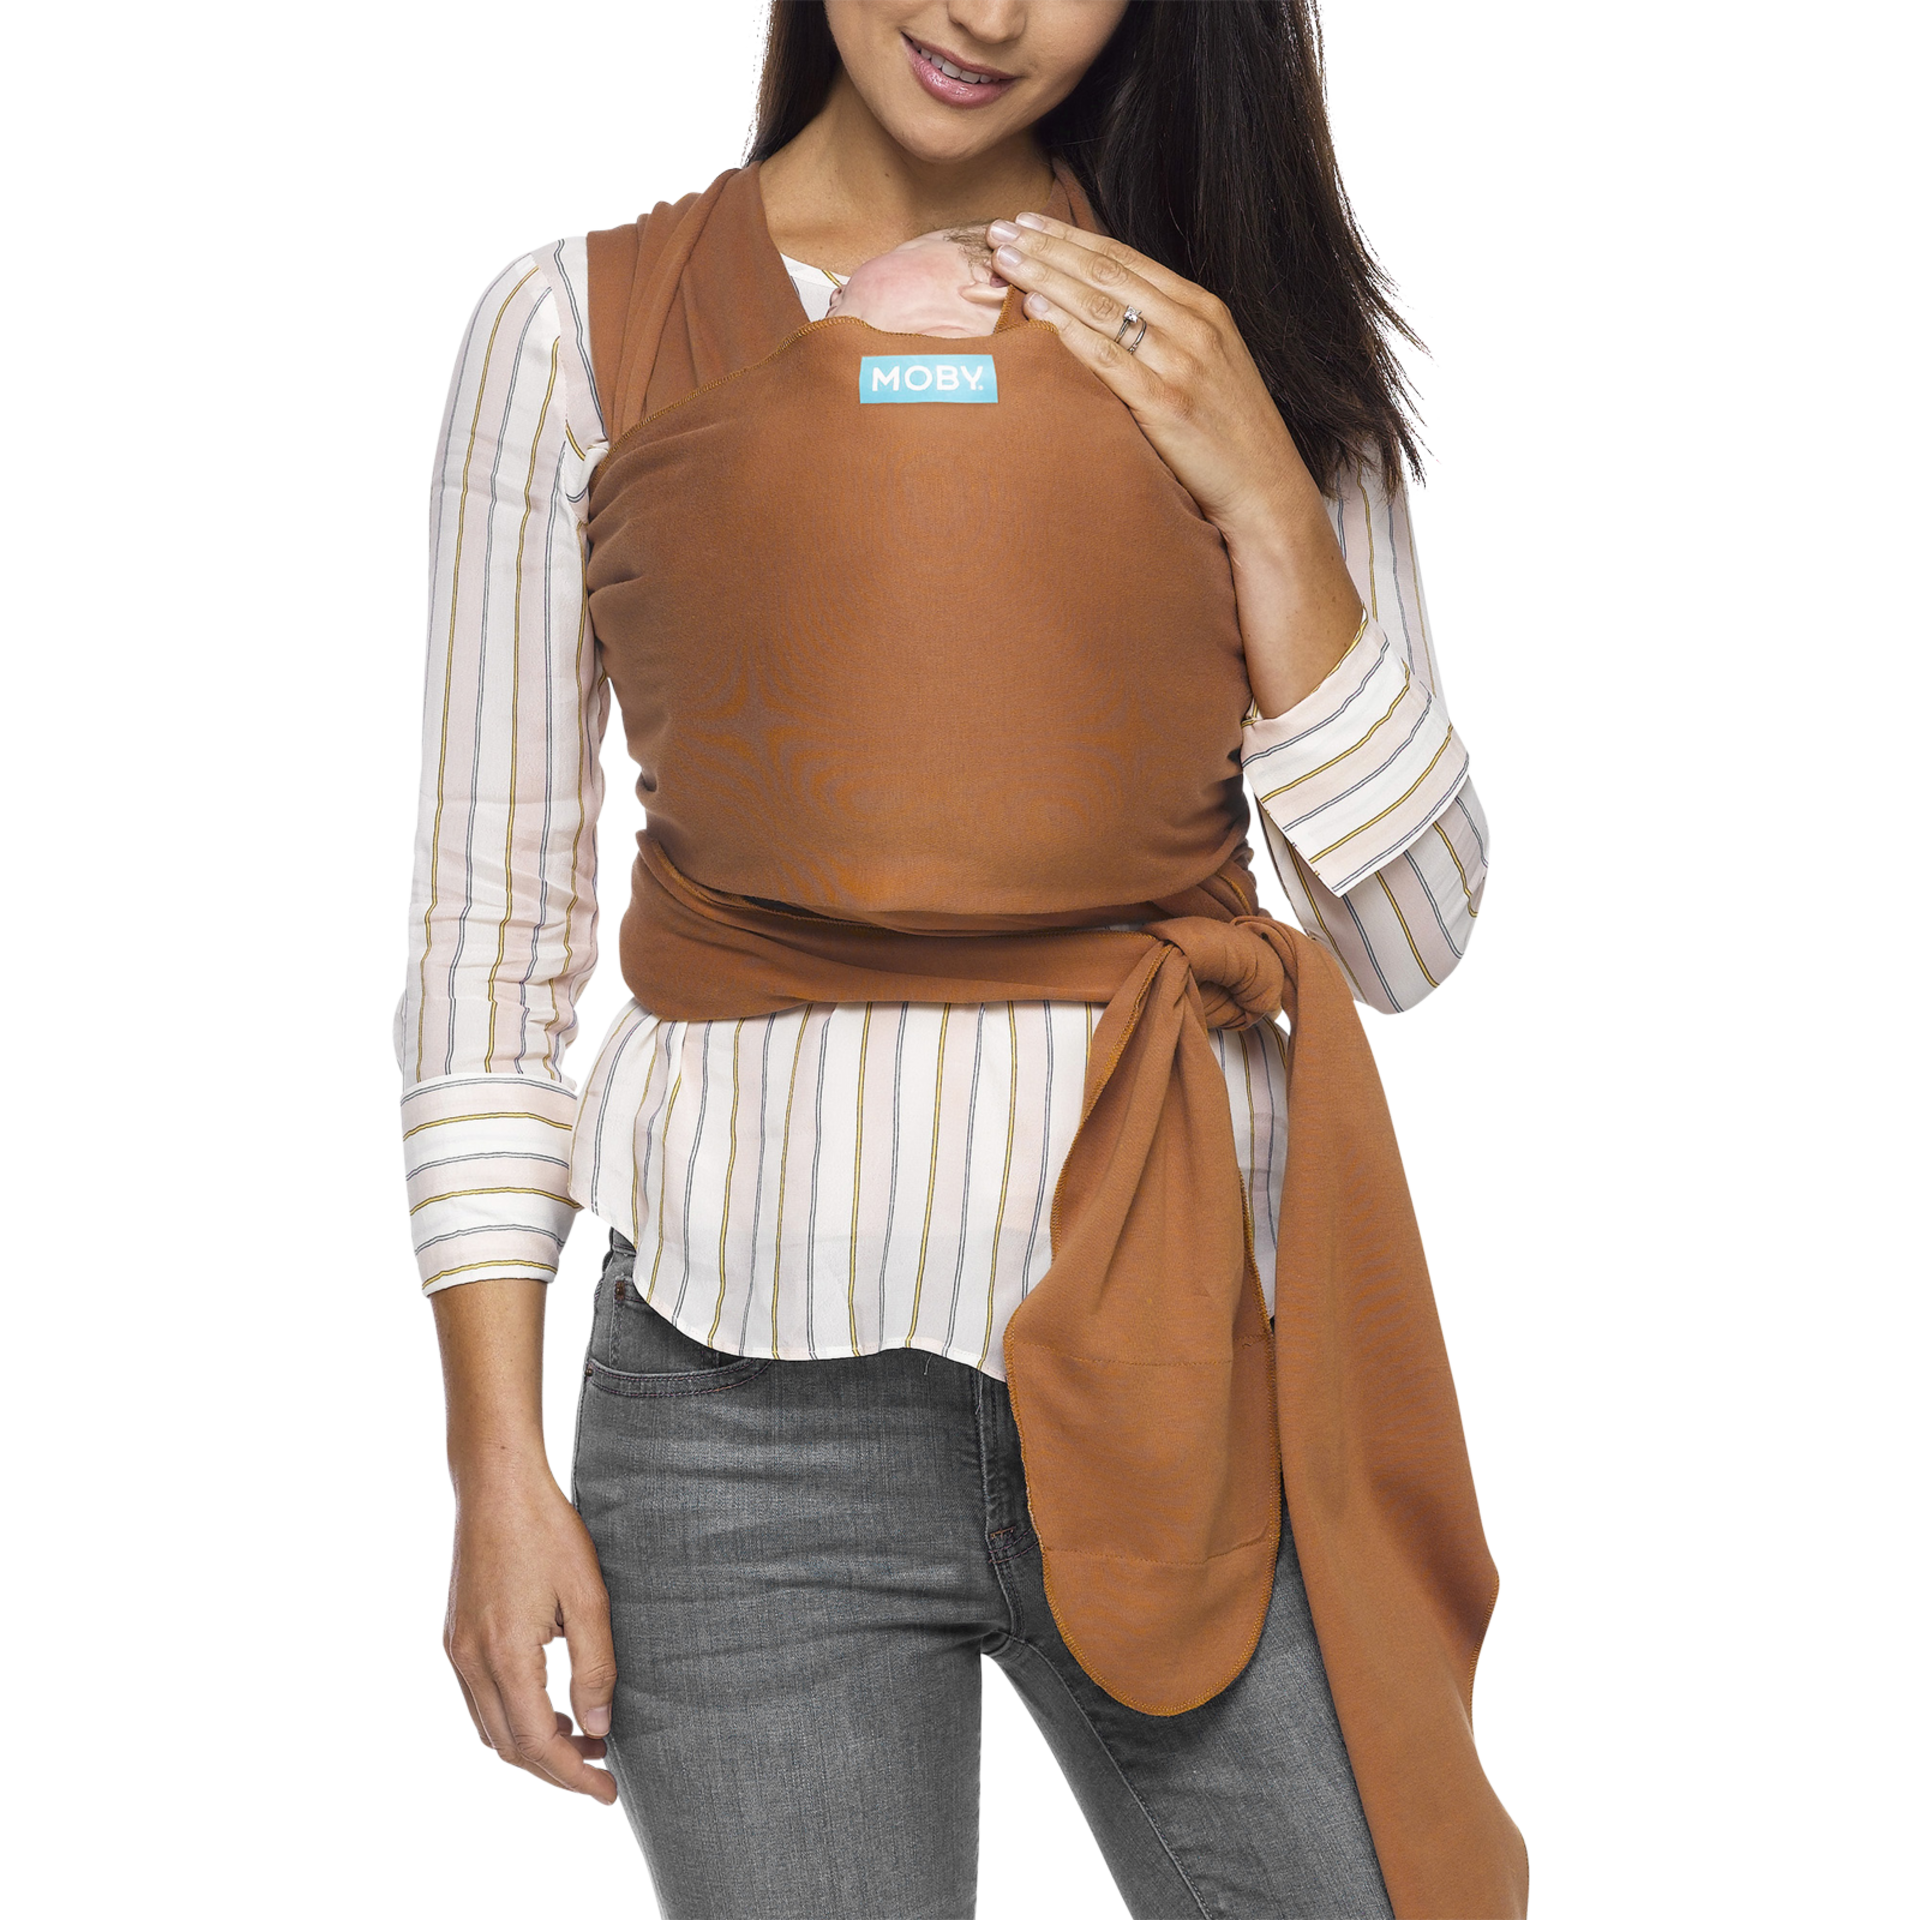 Baby Sling from Birth One Size Fits All Unisex MOBY Evolution Baby Wrap Carrier for Newborn to Toddler up to 30lbs Breathable Stretchy Made from 70% Viscose 30% Cotton